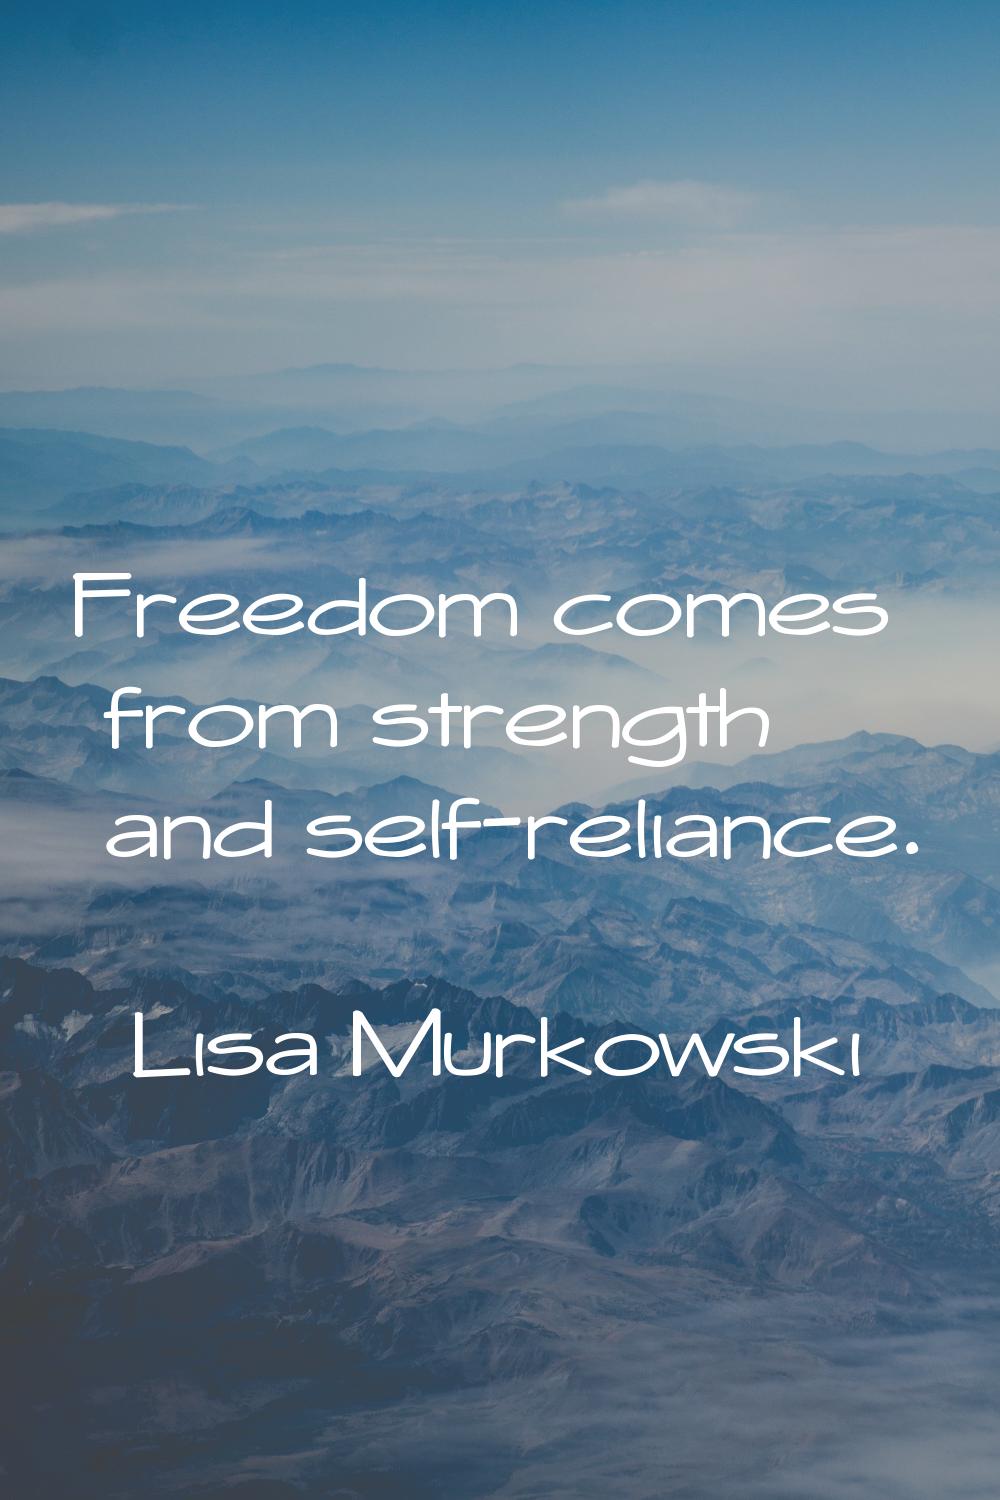 Freedom comes from strength and self-reliance.